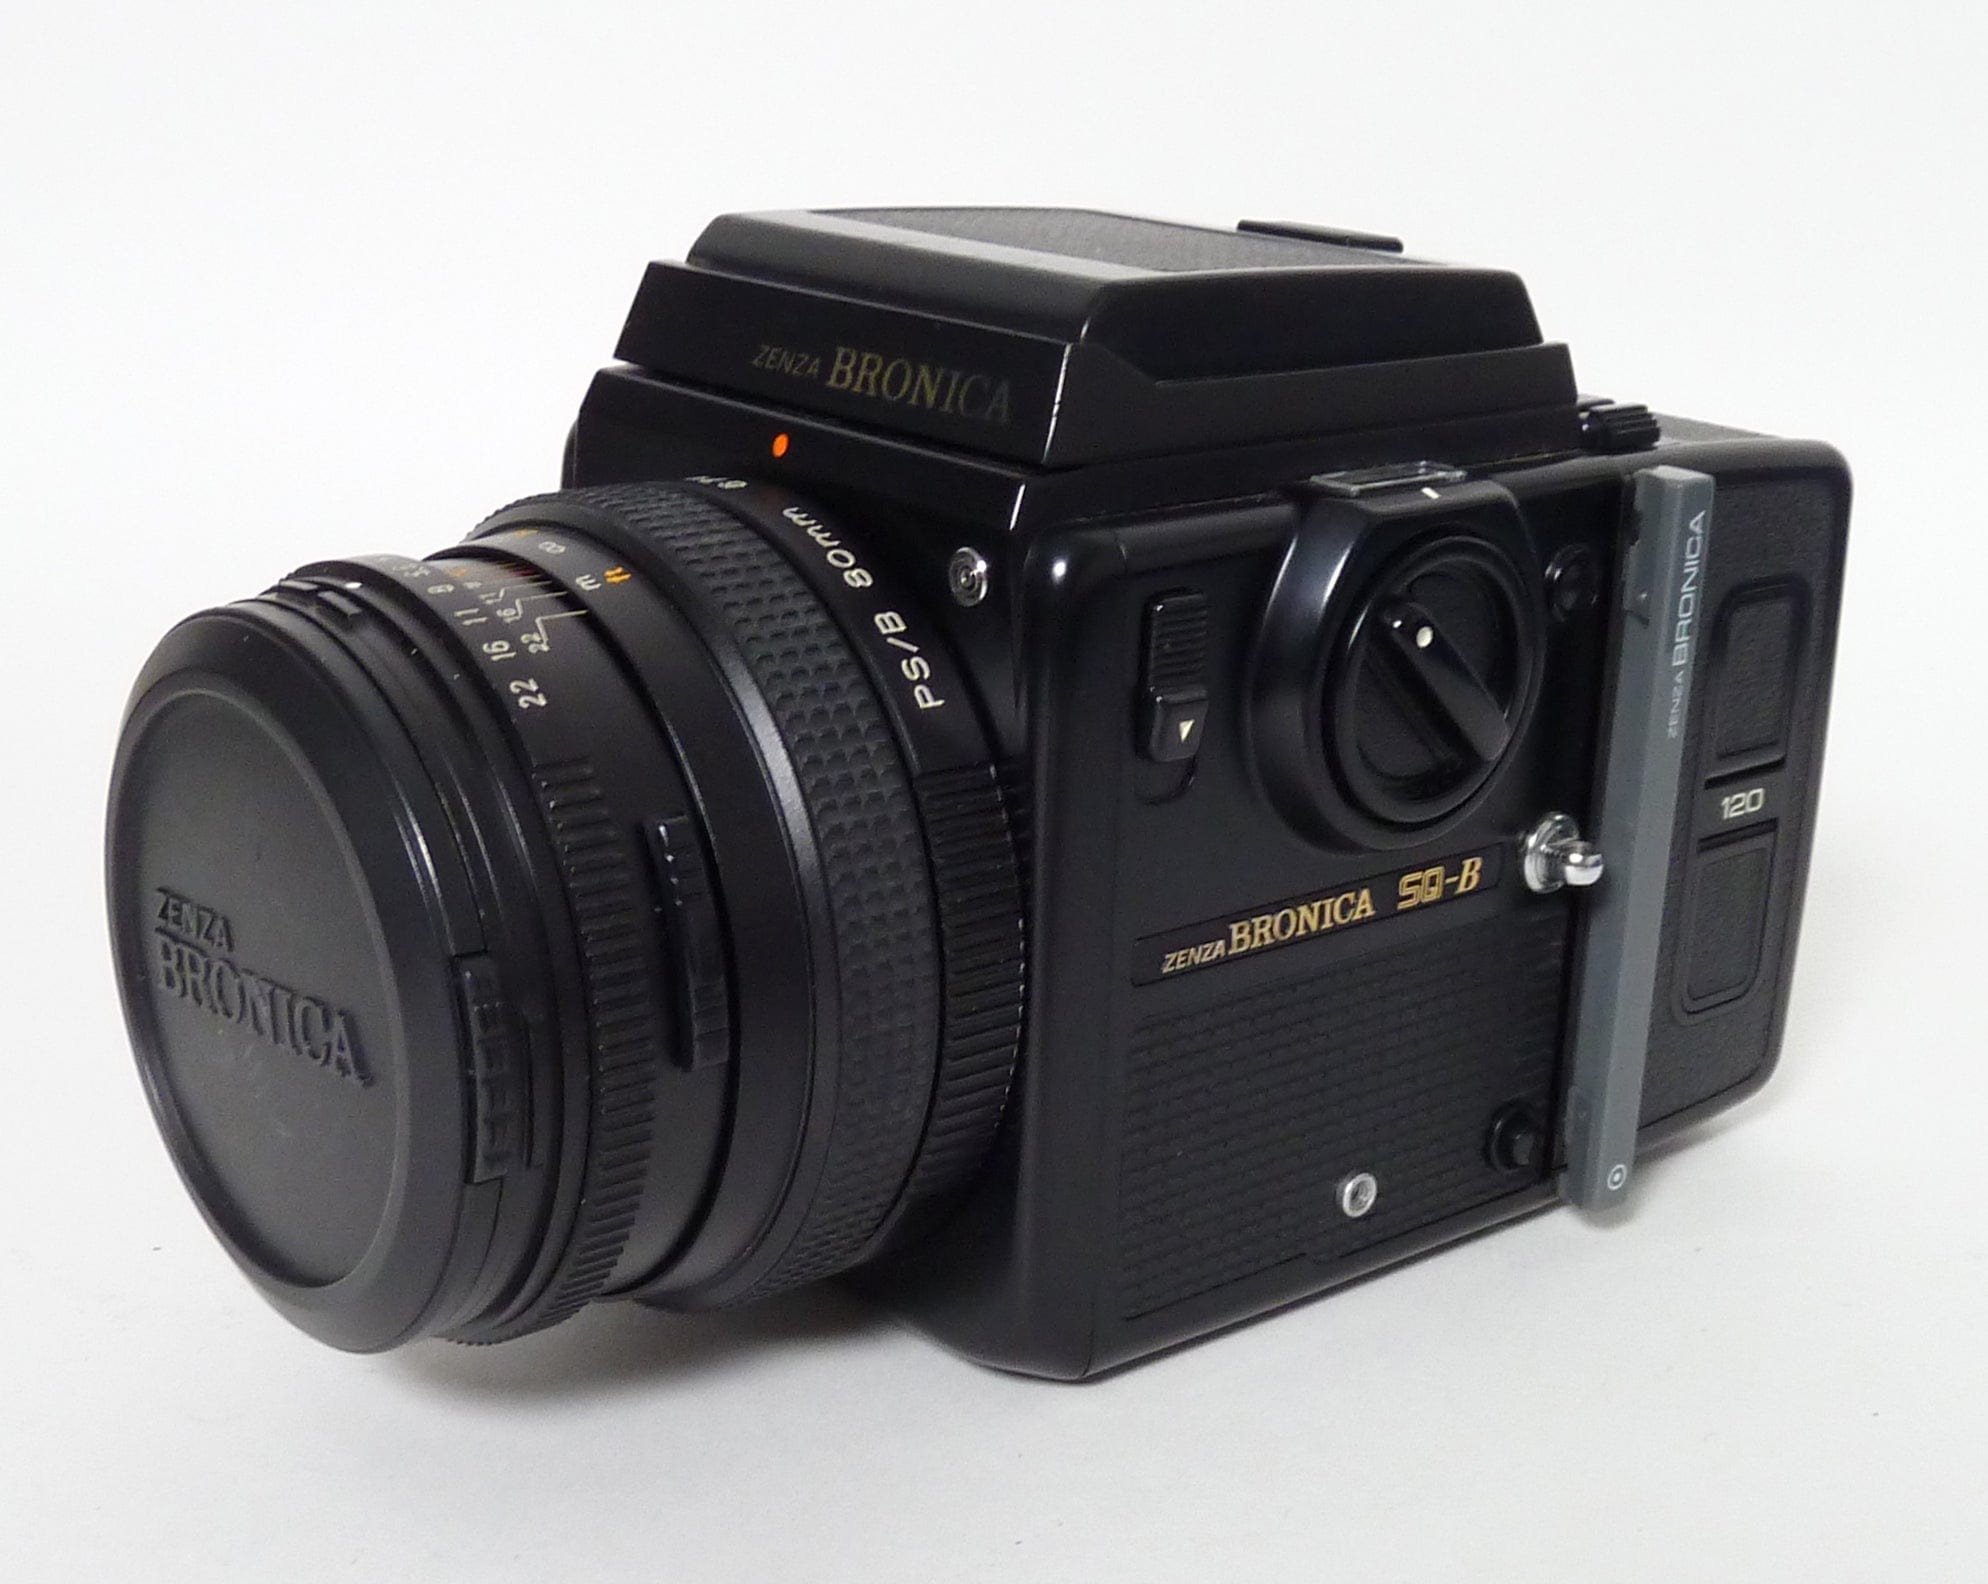 Bronica SQ-B with 80mm F2.8 Lens and Waist Level Finder